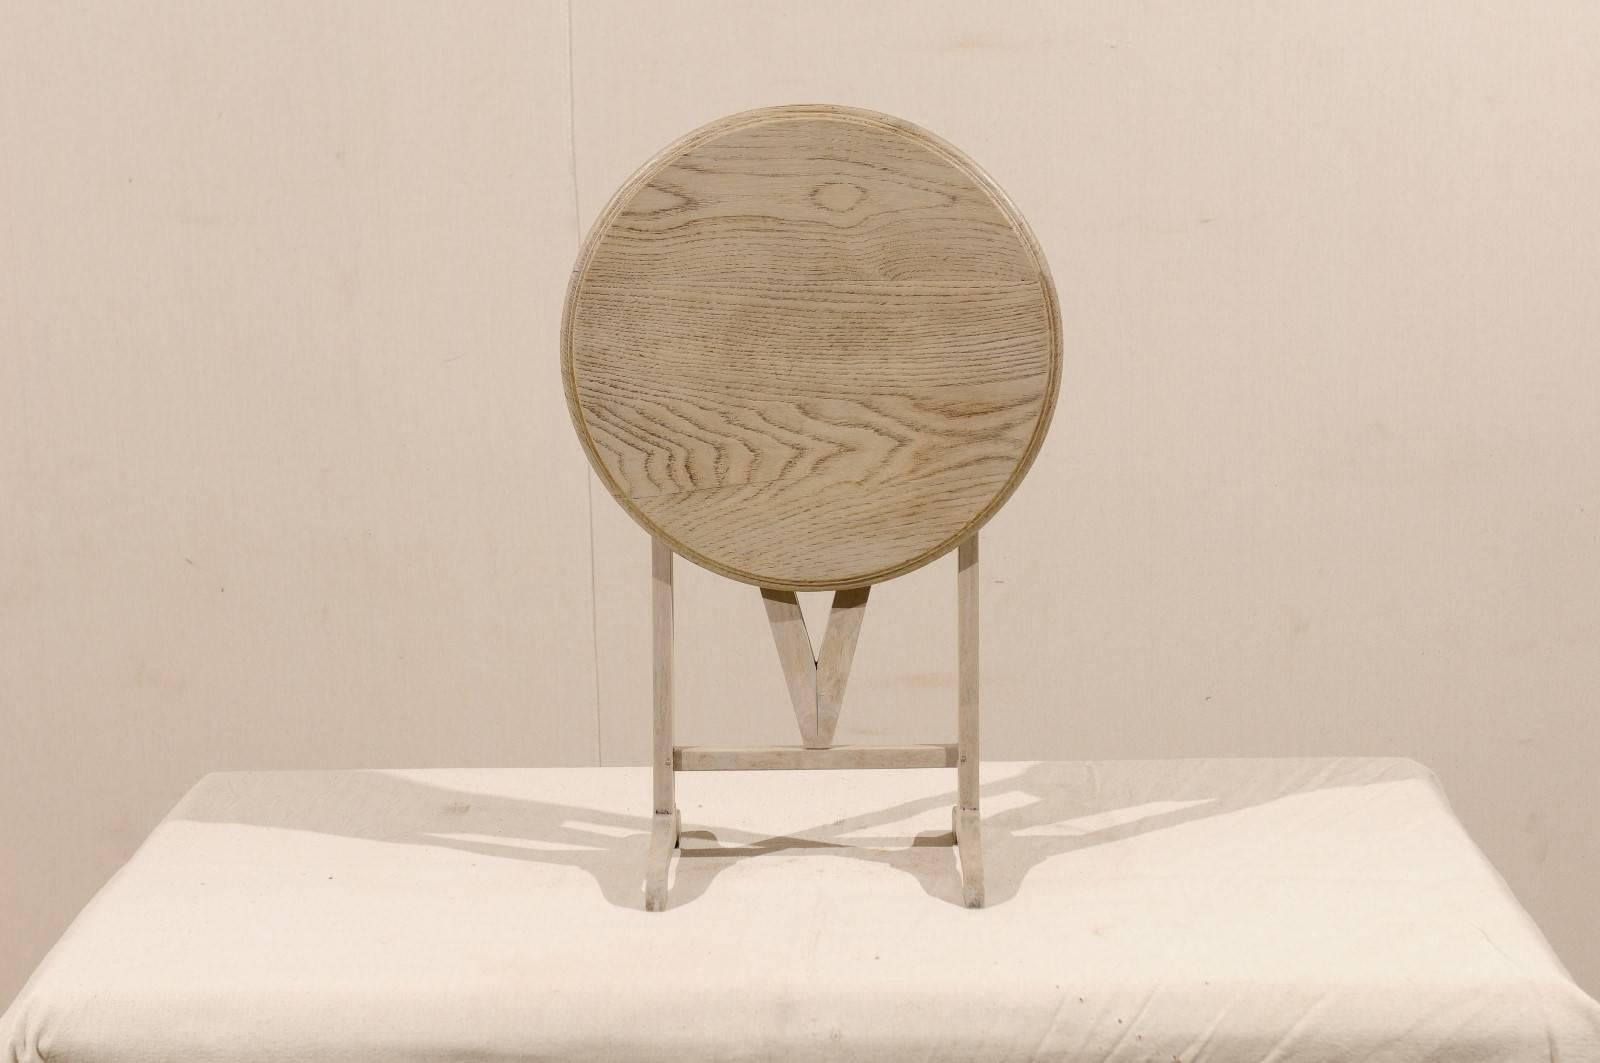 A Belgian petite sized wood folding table in a natural bleached finish from the mid 20th century. This adorable little table would be wonderful as an occasional table or a drinks table. The general color is a grey.